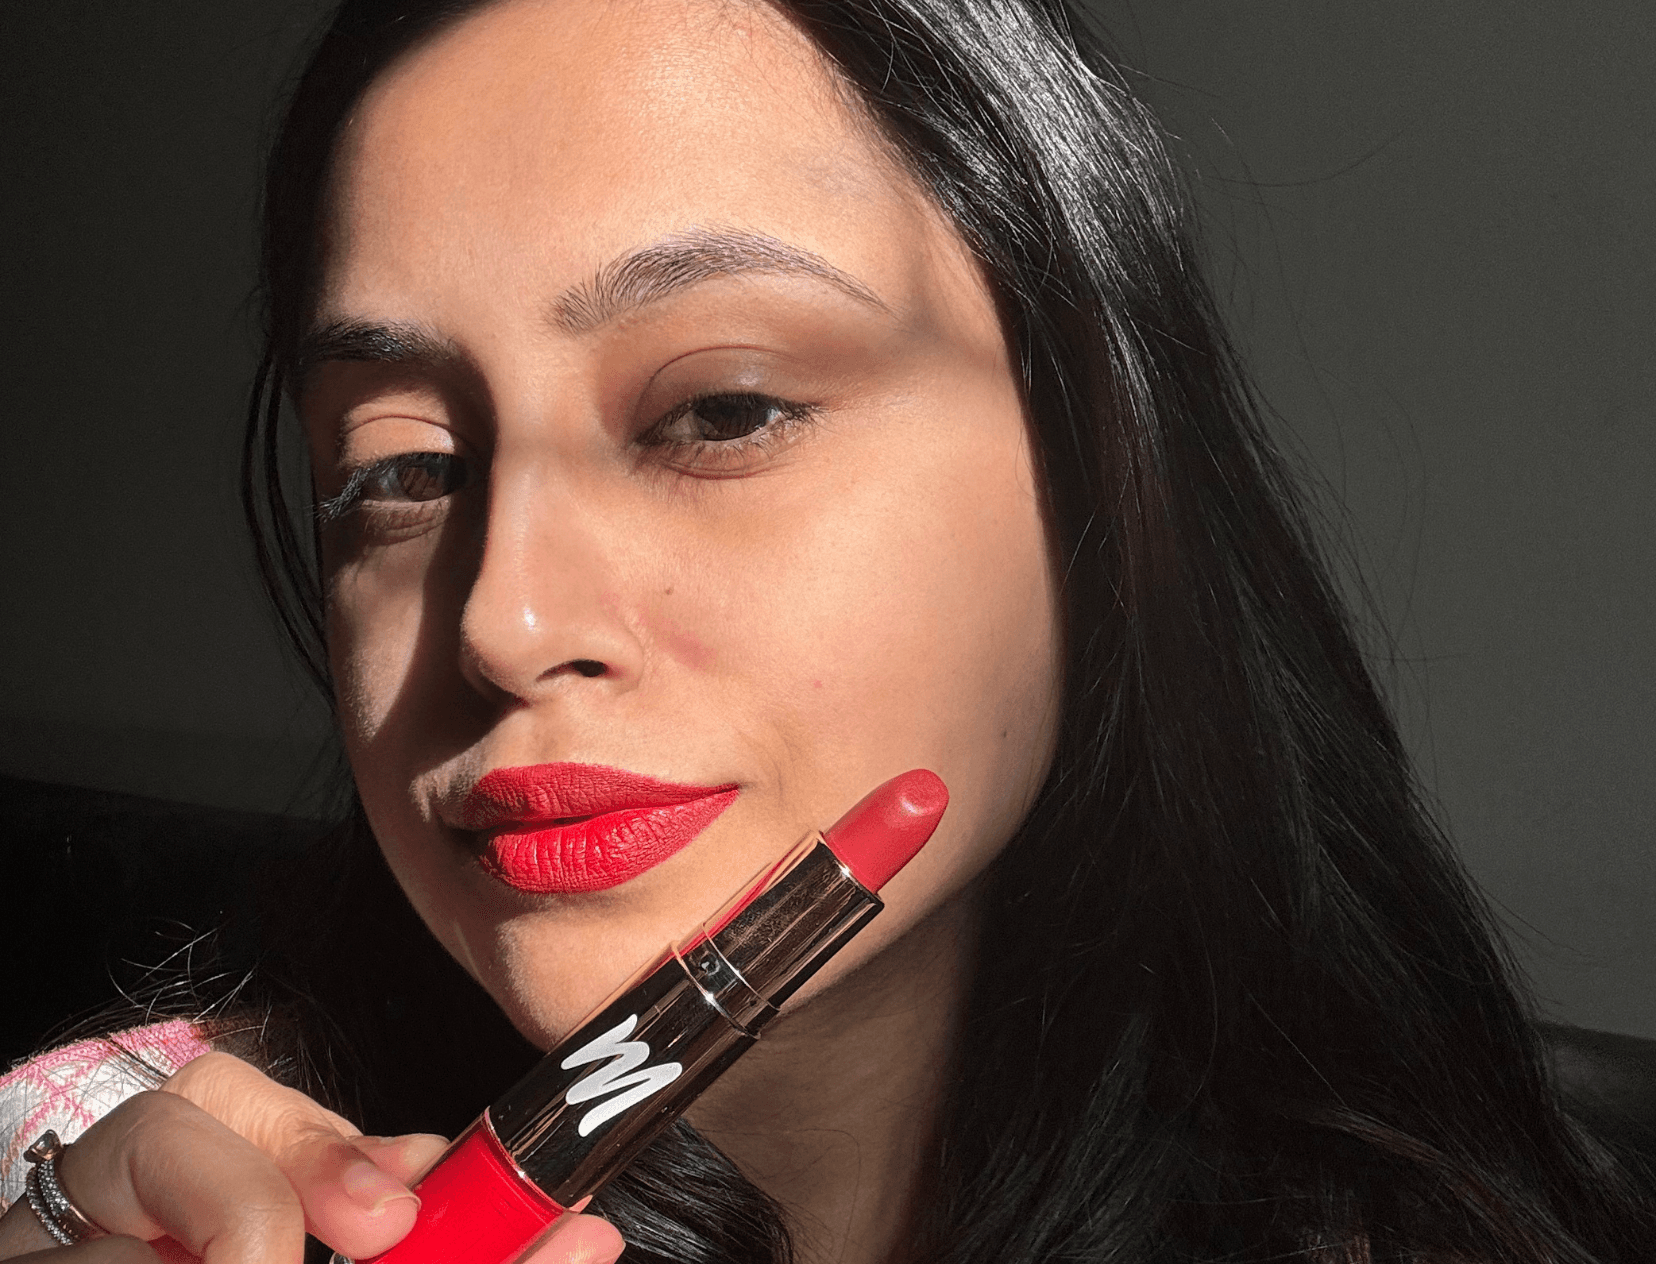 This Lipstick Is The Hybrid Makeup Product I Didn’t Know I Needed Till I Tried It